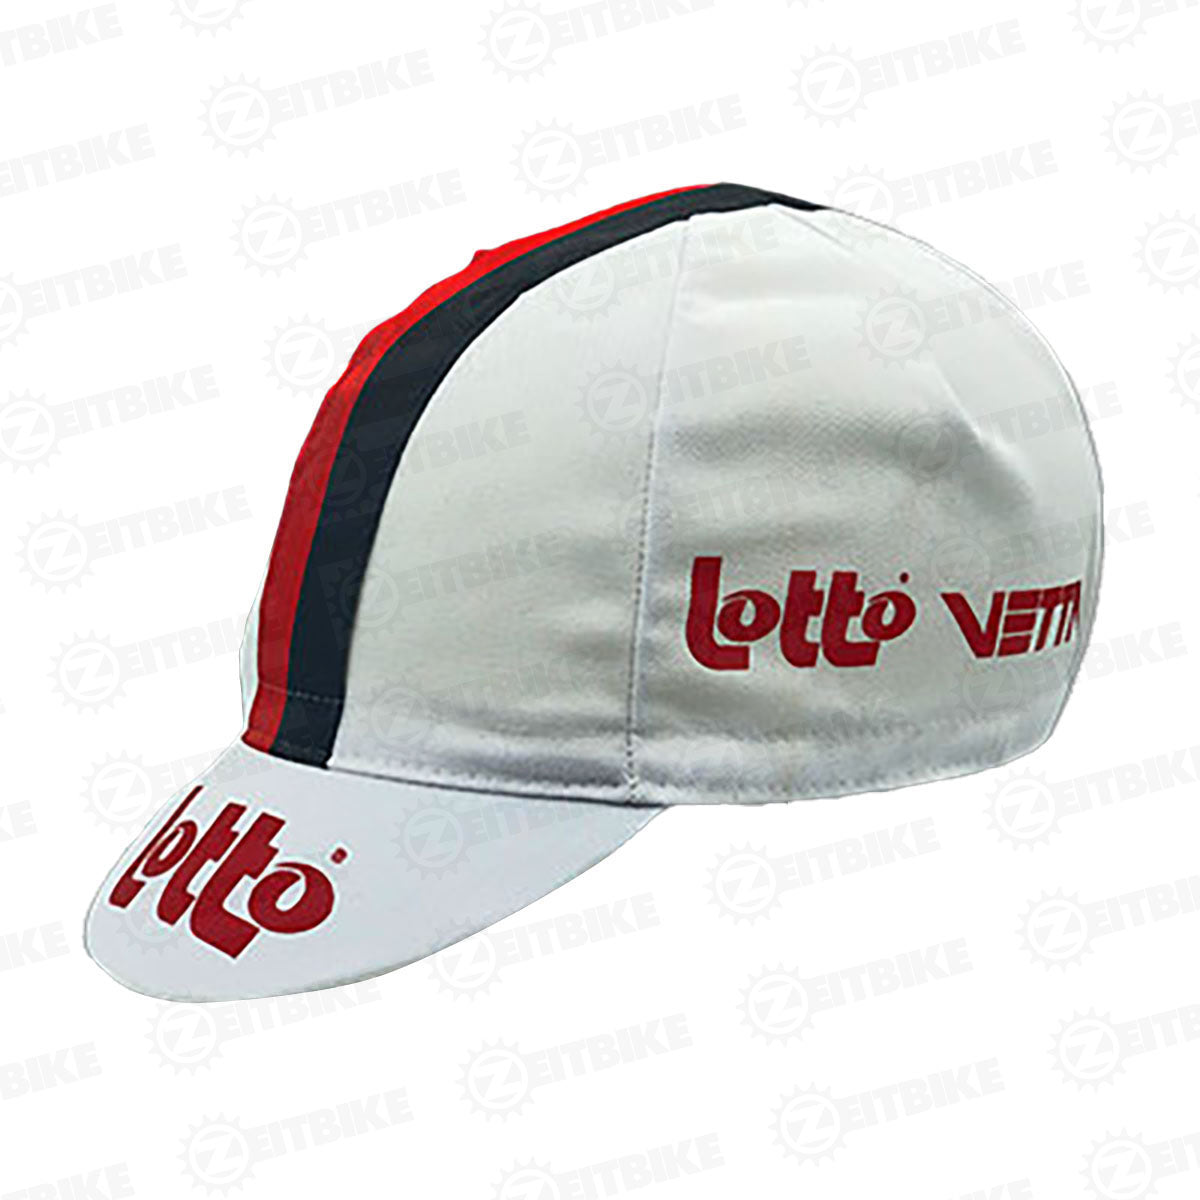 ZEITBIKE - Vintage Cycling Cap - LOTTO VETTA 1994  | Anti Sweat Caps | for Stand Alone or Under Helmet | Team Jersey Cap Outdoor Cap